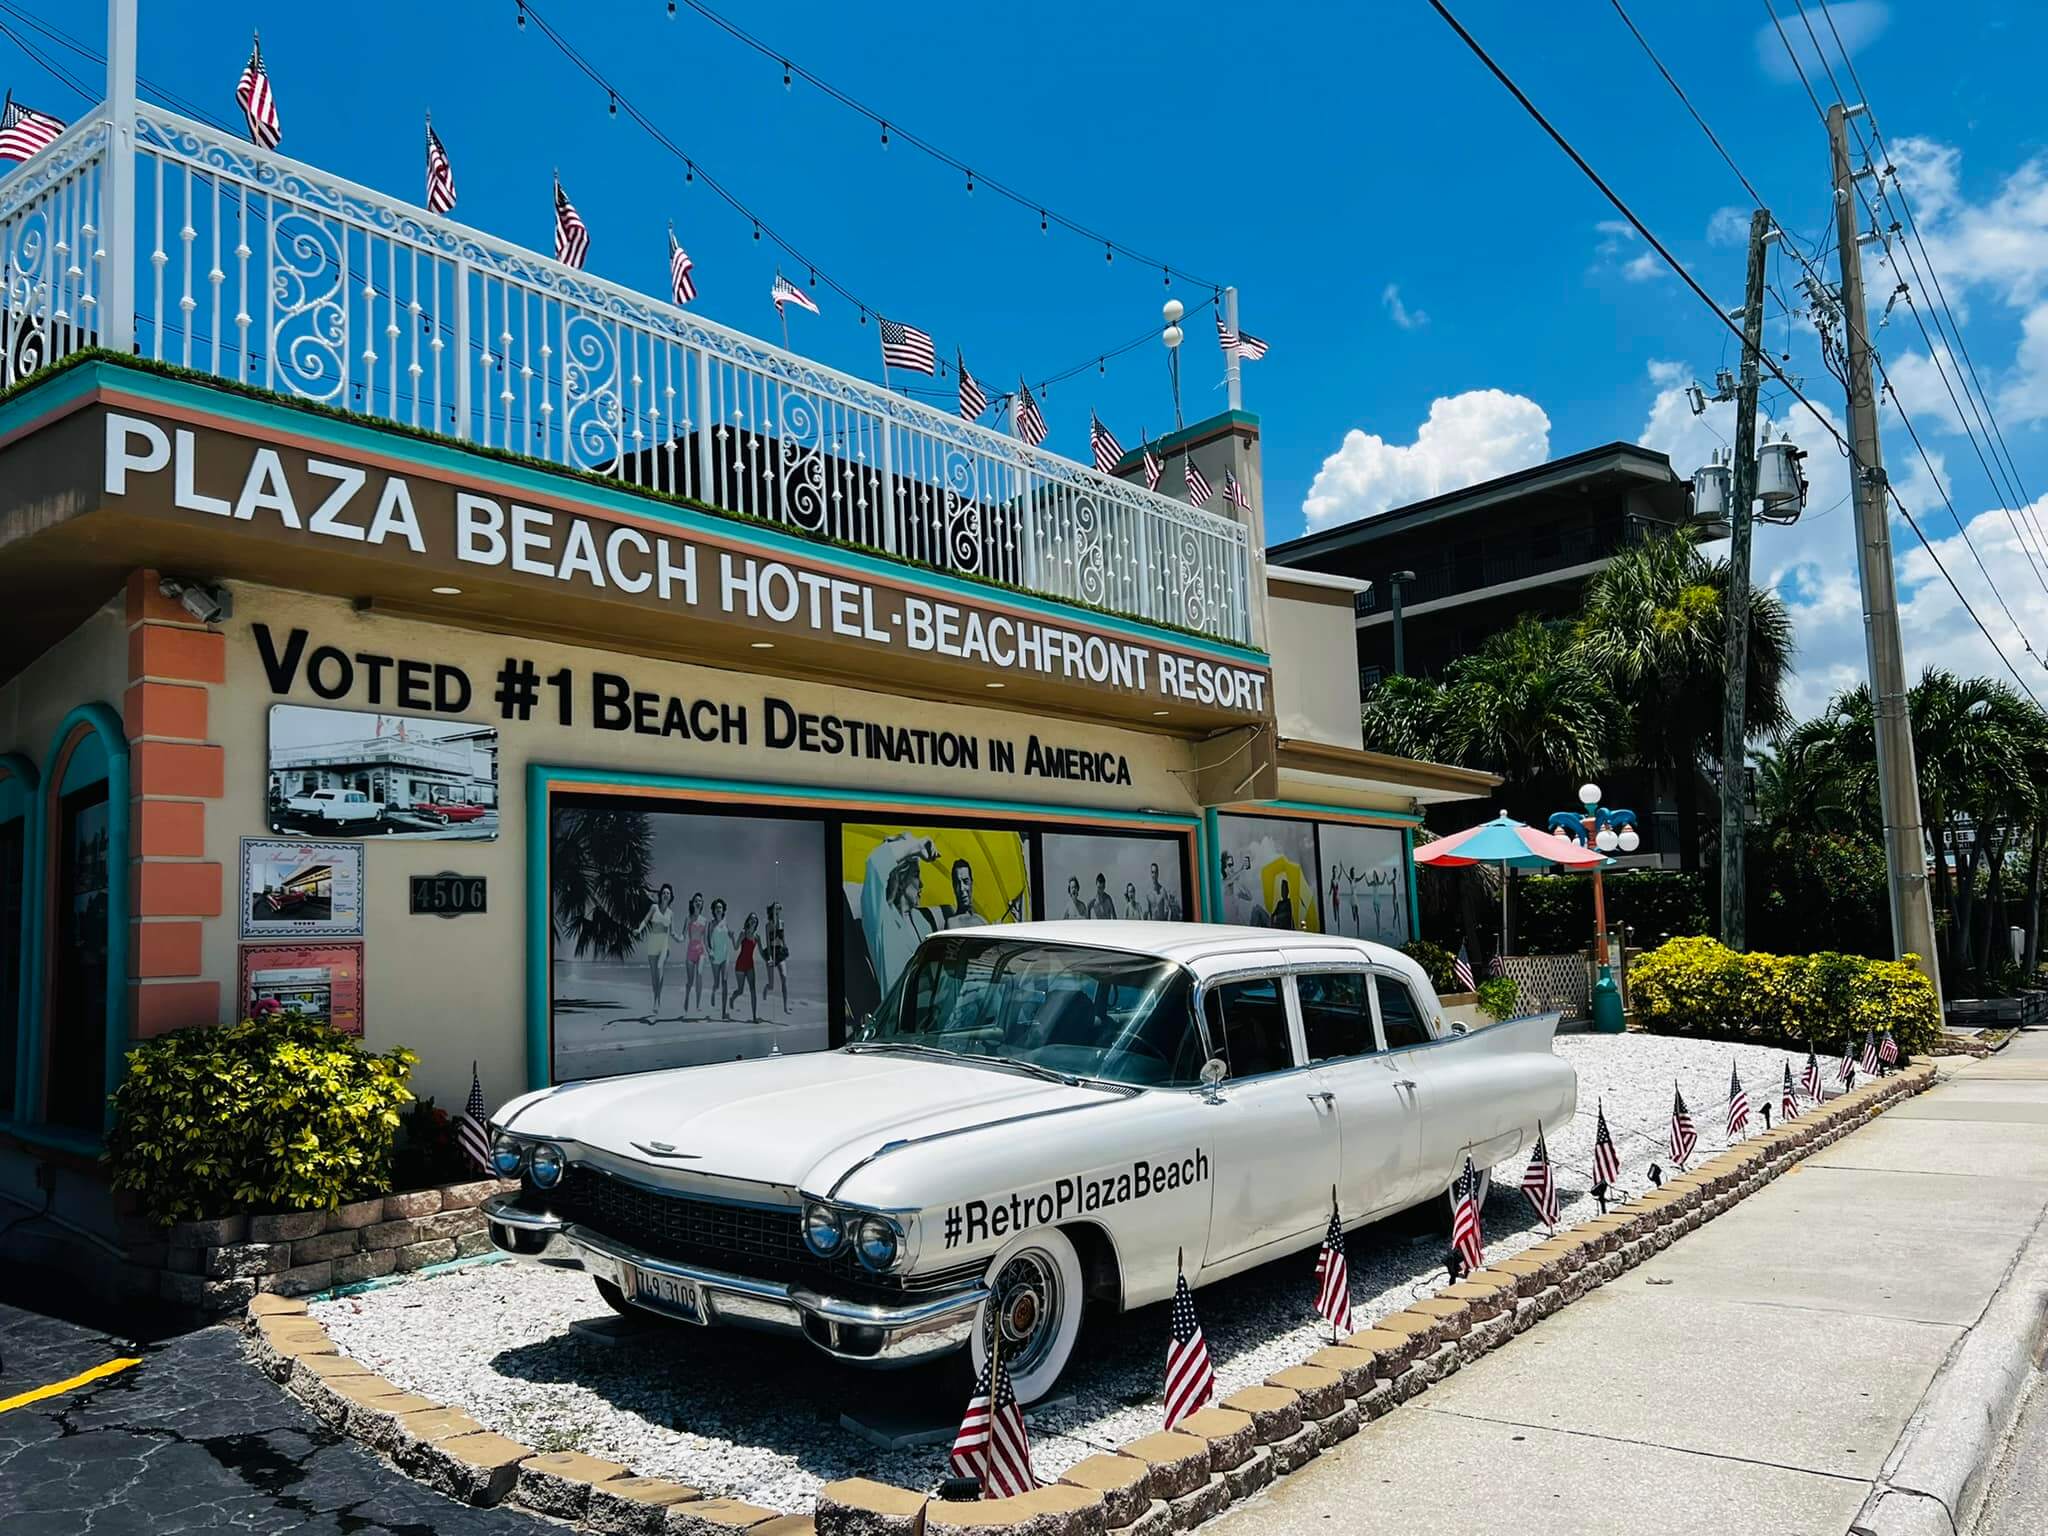 Plaza Beach Resort with car parked in the front